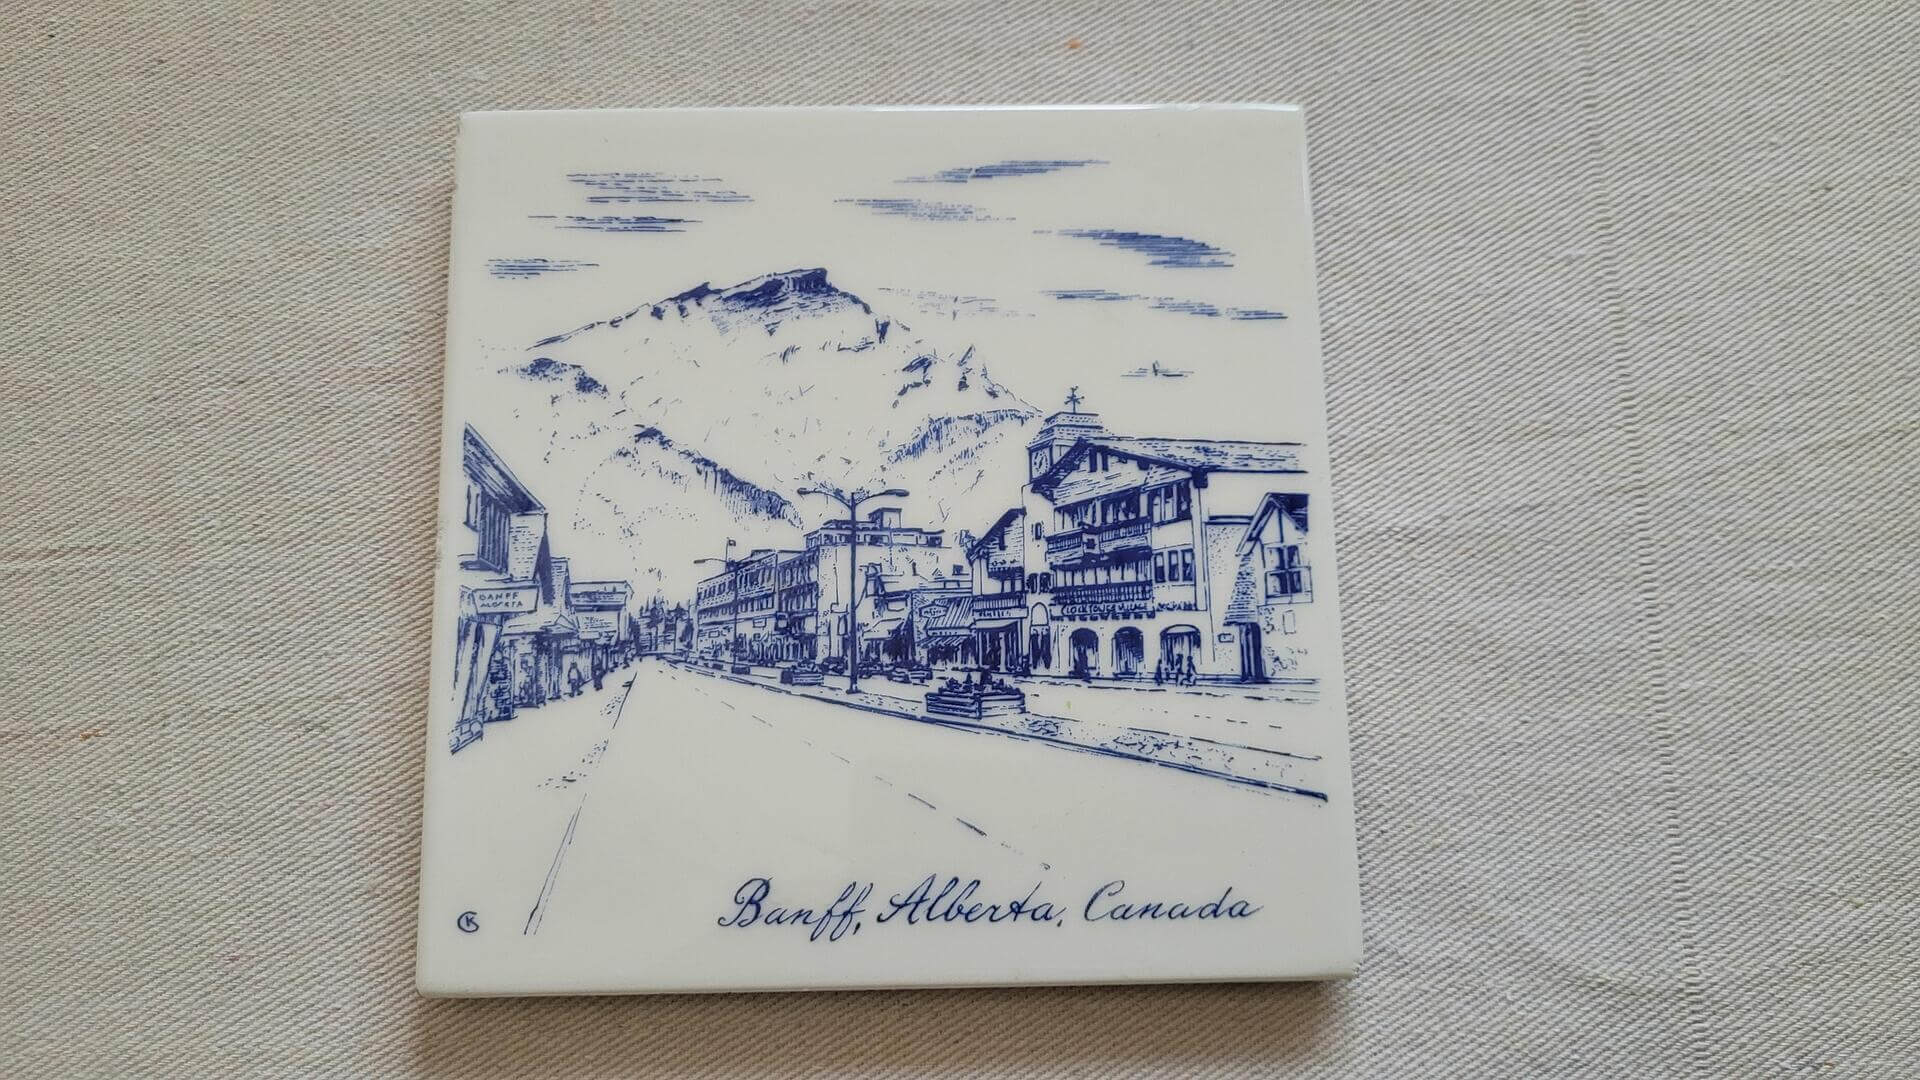 Vintage Banff Ave scenic downtown trivet tile with wall hook and pads. Rare custom design by Kantile Ceramics kiln fired heat proof perma finish Canadiana collectible ceramics